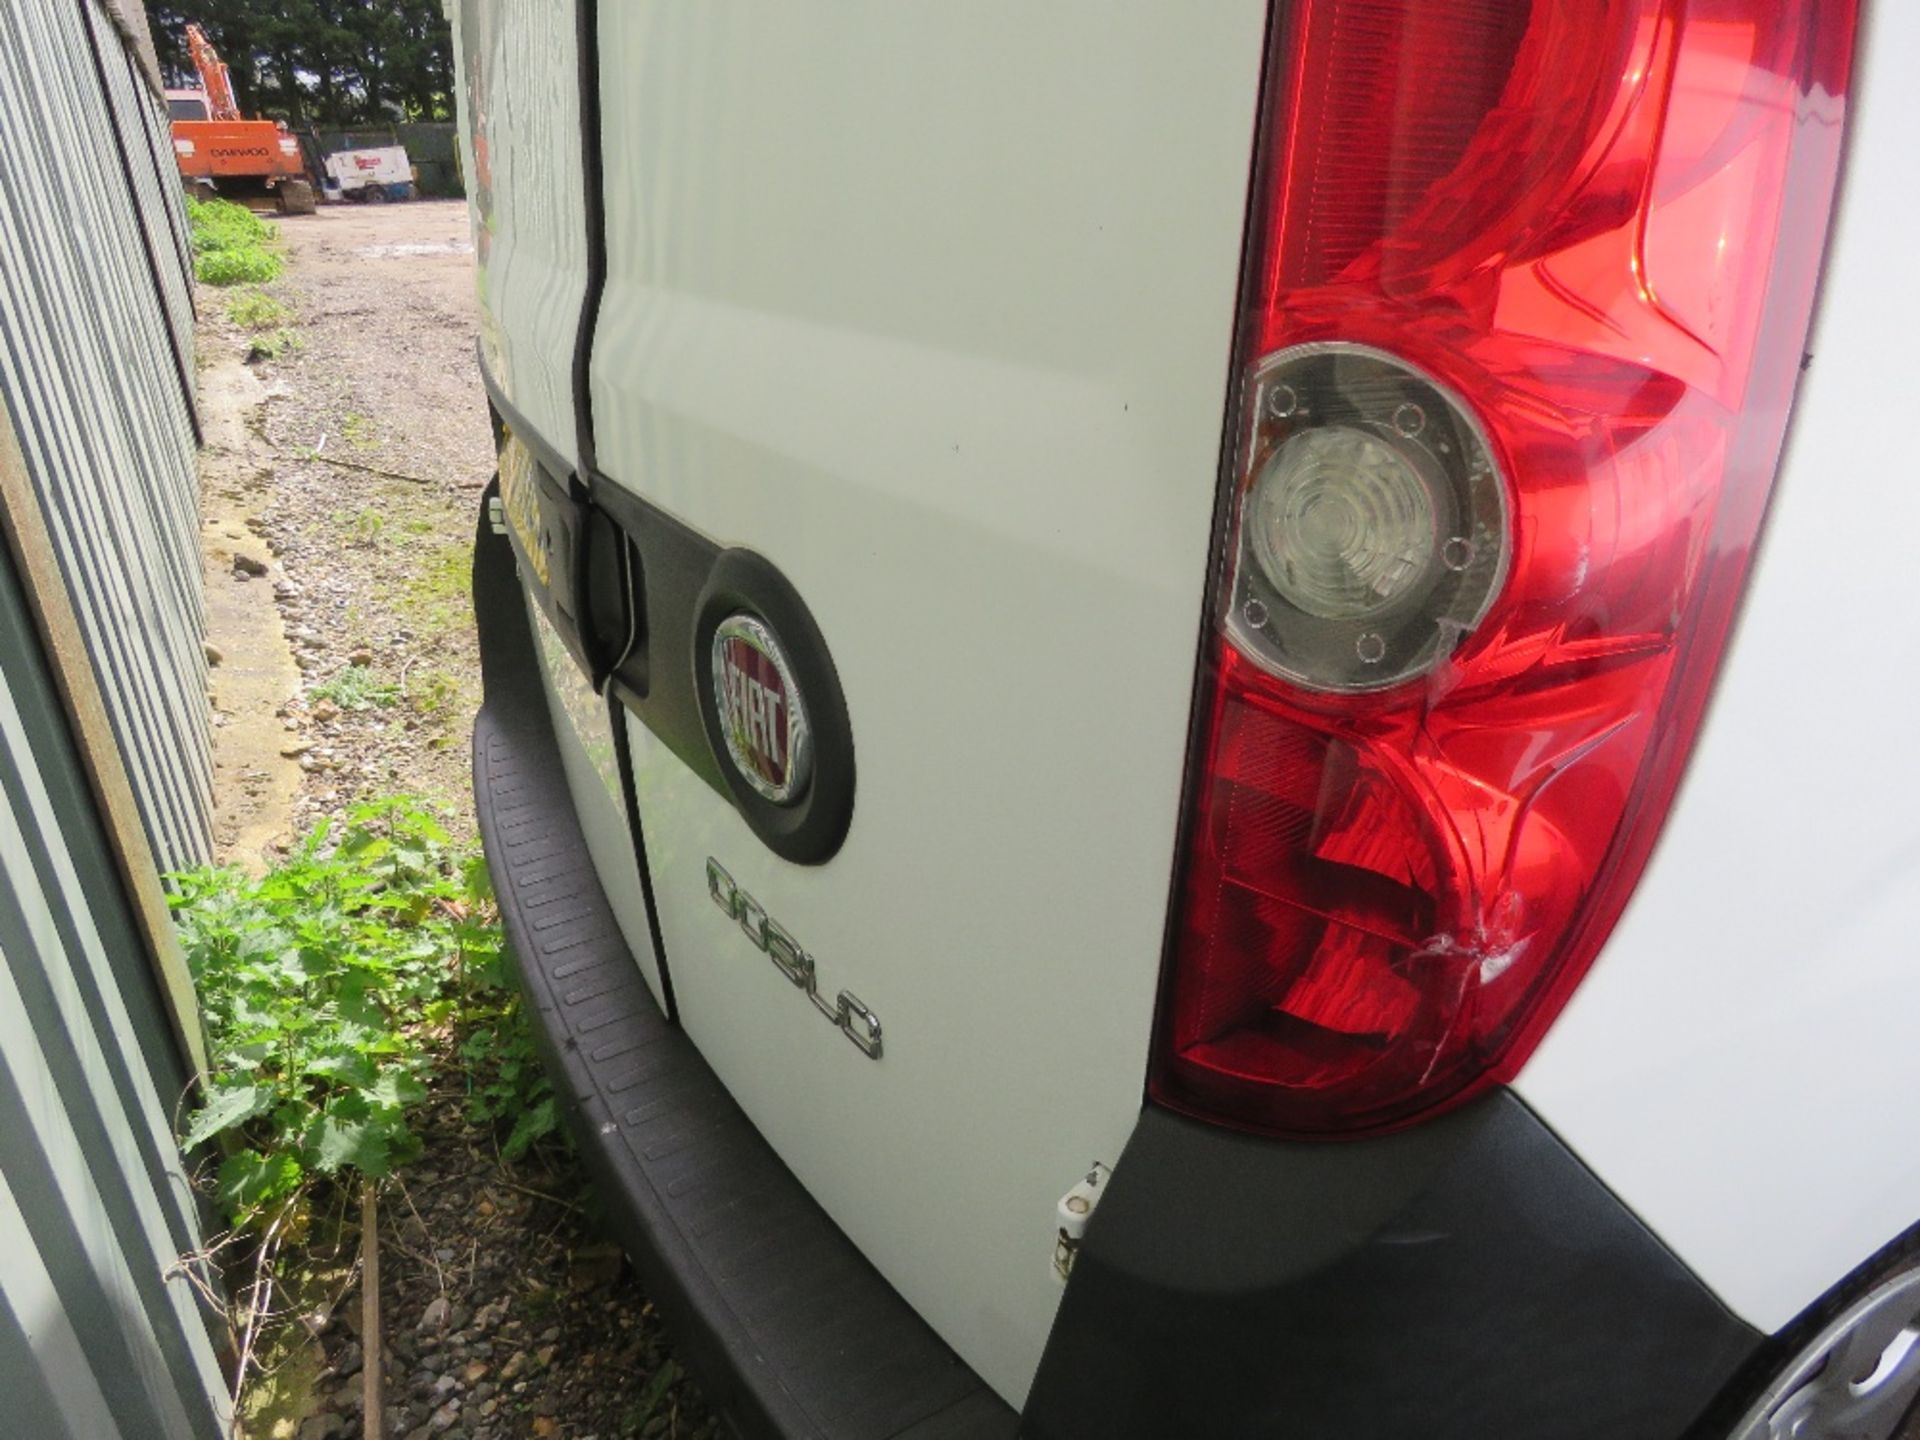 FIAT DOBLO PANEL VAN REG: WV63 HCJ. 84343 REC MILES. WHEN TESTED WAS SEEN TO DRIVE, STEER AND BRAKE. - Image 10 of 12